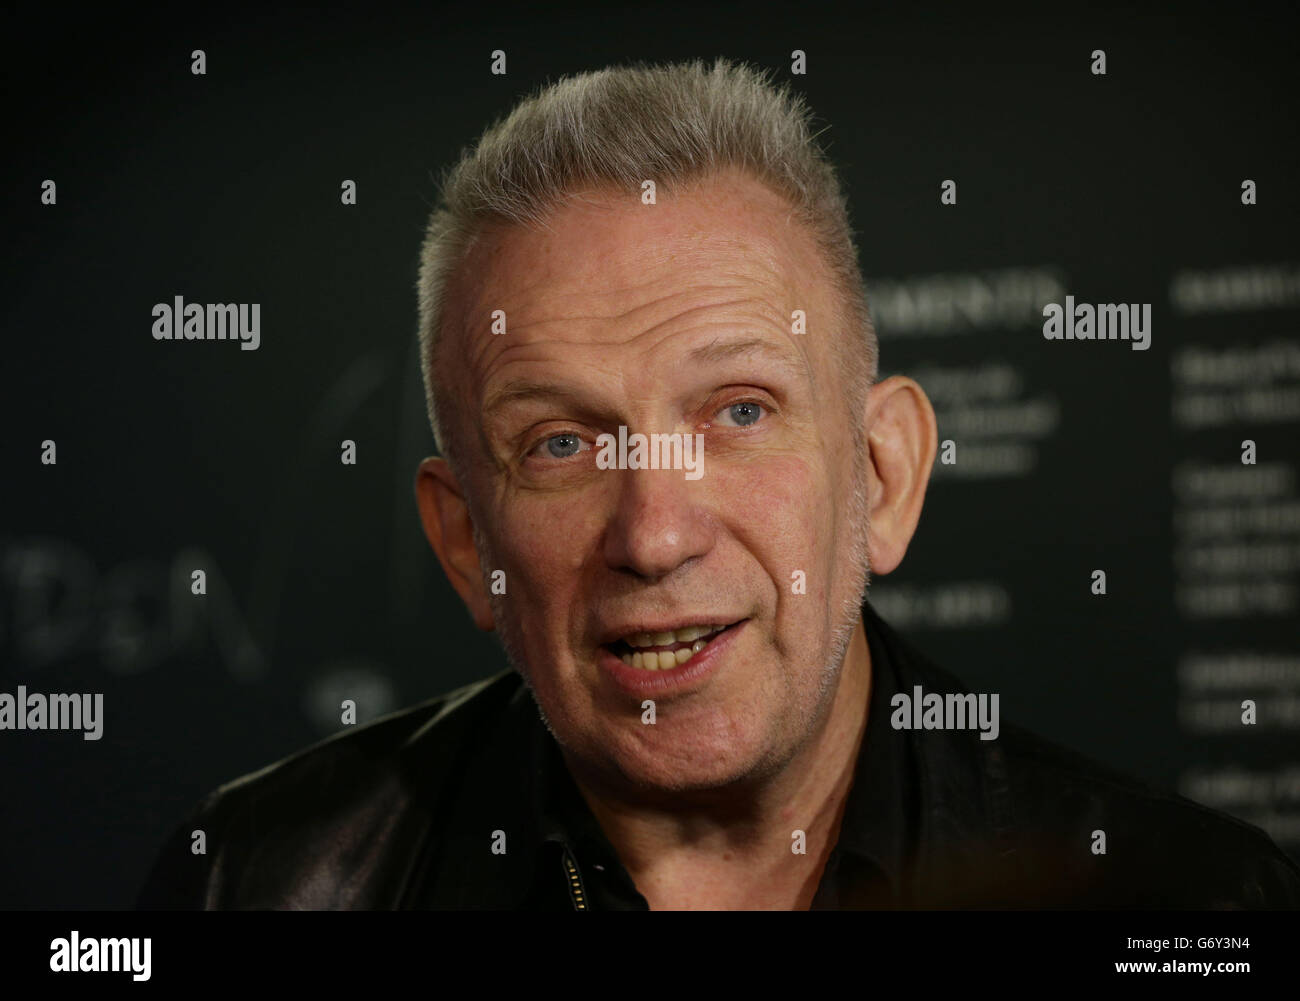 Jean Paul Gaultier during a media view of 'The Fashion World of Jean Paul Gaultier: From the Sidewalk to the Catwalk' - the first major exhibition devoted to the celebrated French couturier, including costumes for film and performance including the conical bra and corsets Madonna wore during her 1990 Blond Ambition World Tour, stage costumes designed for Kylie Minogue as well as pieces created for the films of Pedro Almodovar among others - at Barbican Art Gallery in London. Stock Photo